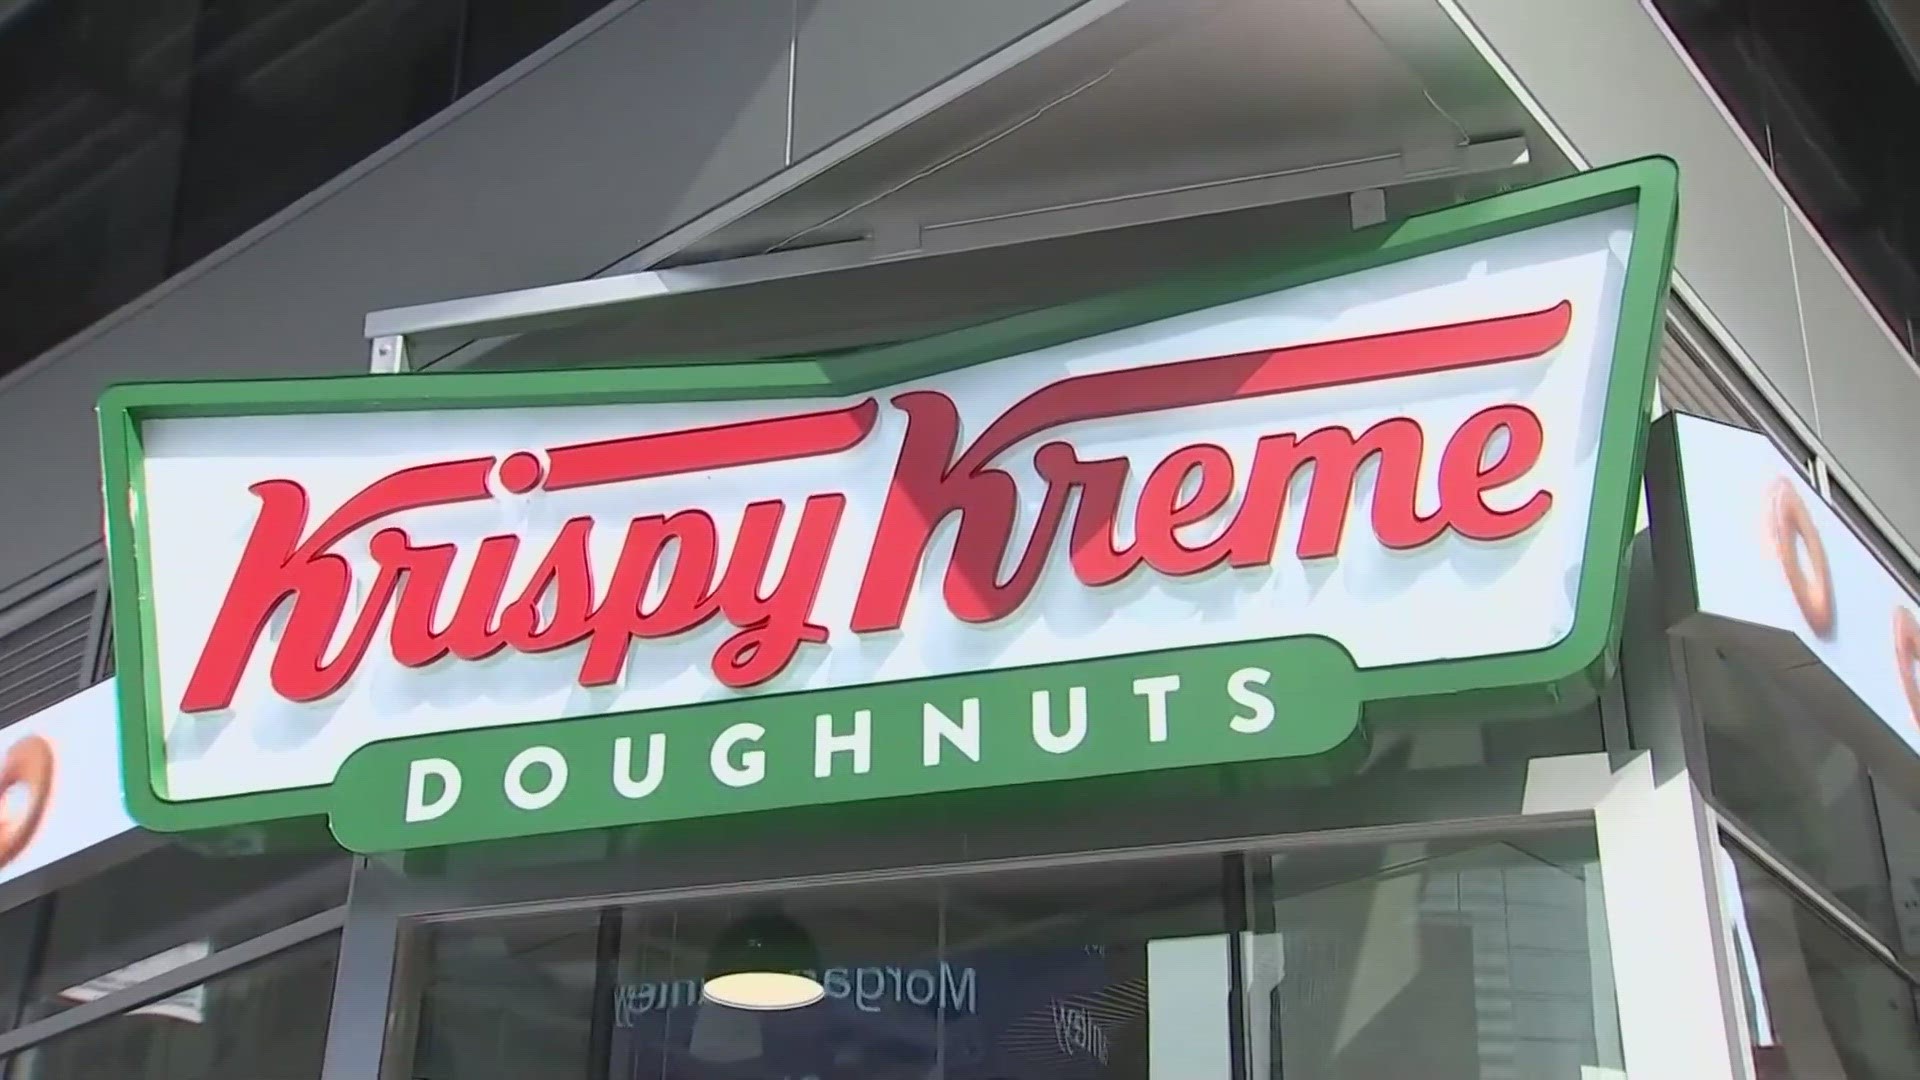 At Krispy Kreme, customers can buy a dozen original glaze doughnuts and get a second dozen of doughnuts for the sales tax amount spent on the first dozen.